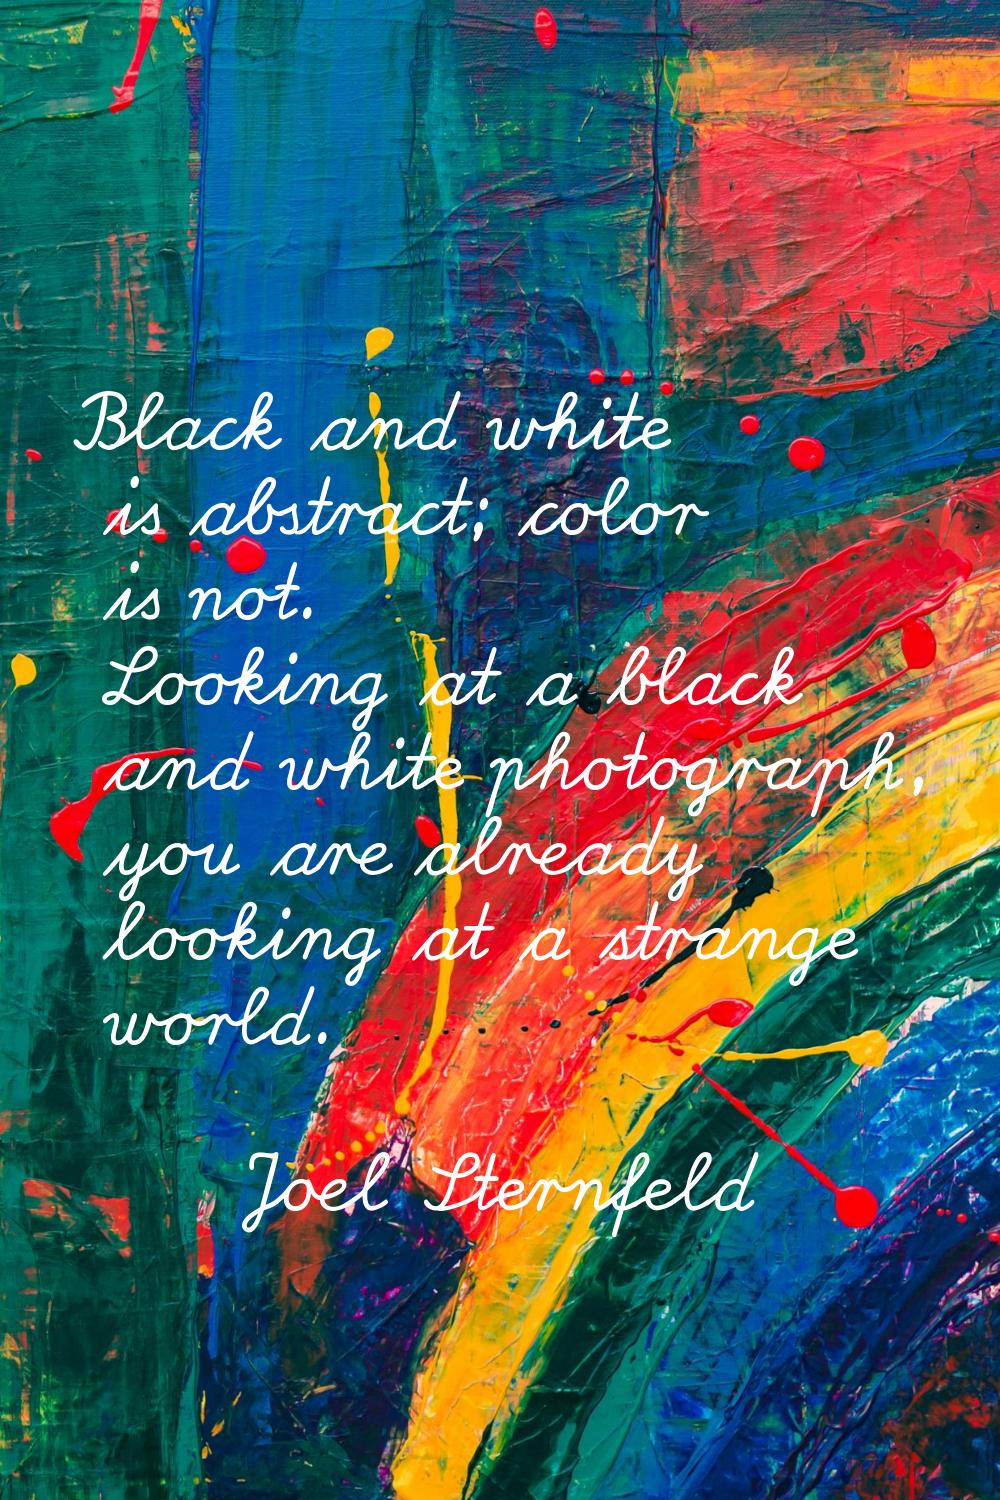 Black and white is abstract; color is not. Looking at a black and white photograph, you are already